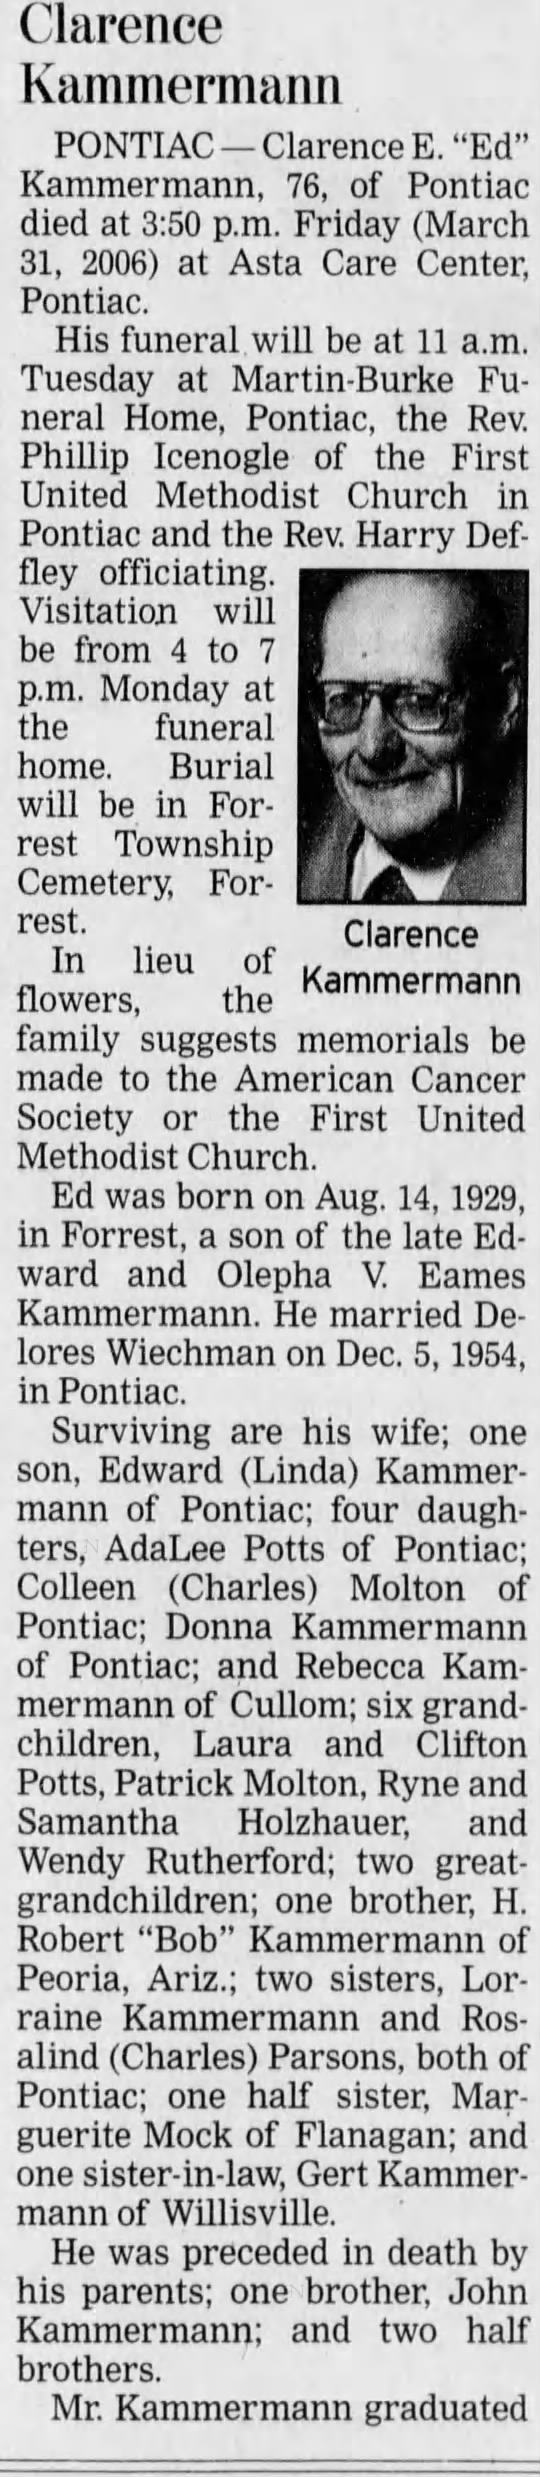 Obituary for Clarence E. Kammermann, 1929-2006 (Aged 76)